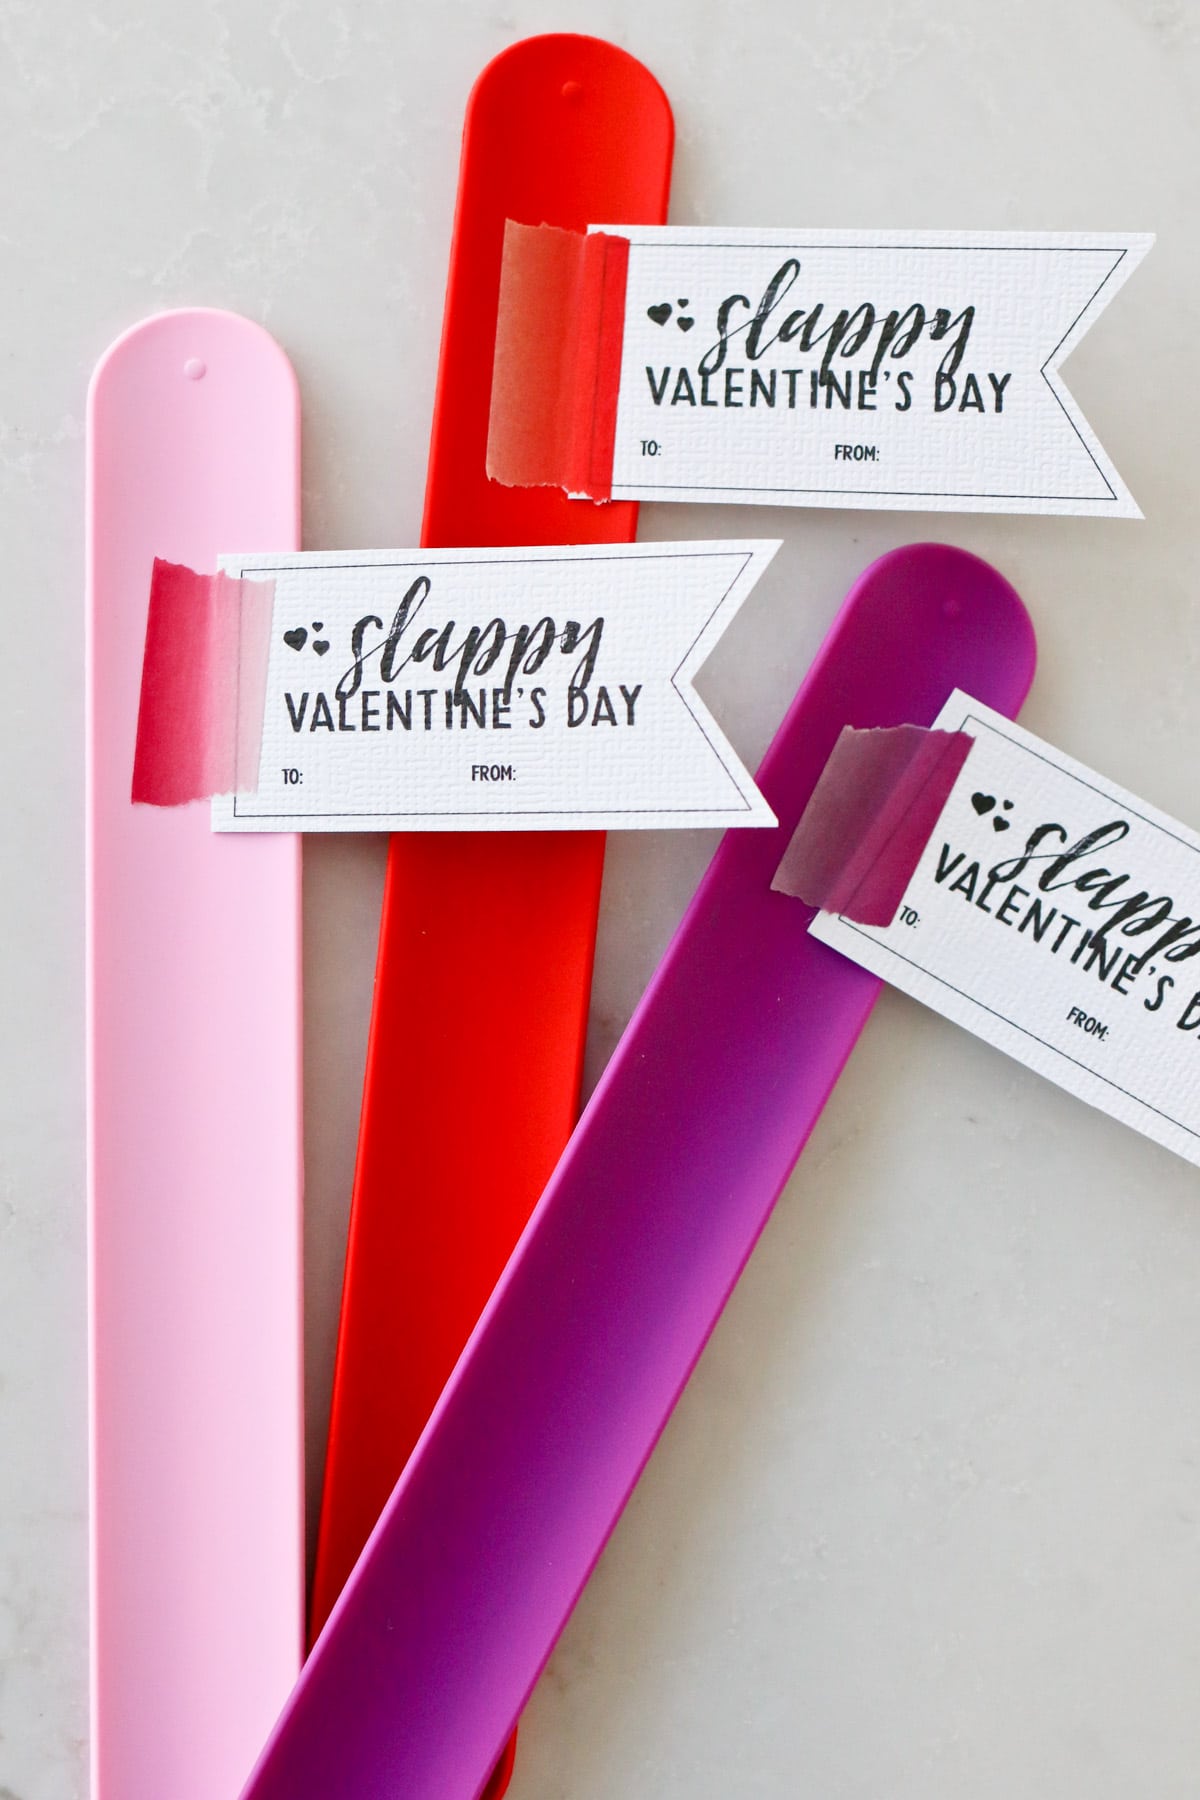 Slappy Valentines Day - Free printable for a non candy class valentines.